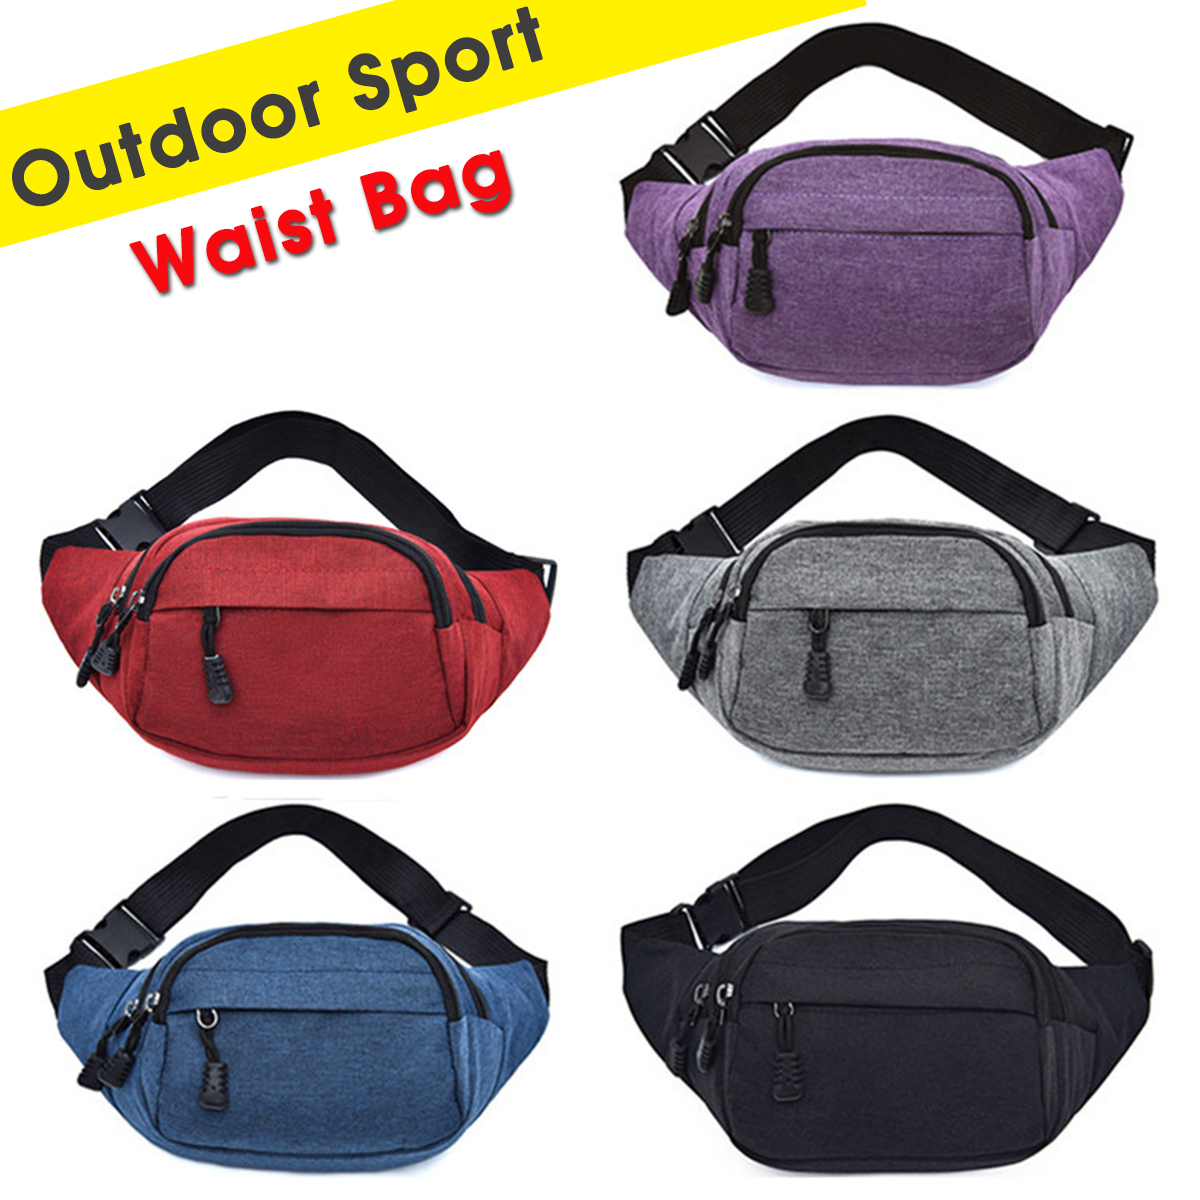 Large-Capacity-Sports-Waist-Bag-Phone-Bag-Crossnody-Bag-For-Outdoor-Sports-Hiking-Jogging-Running-1534489-2